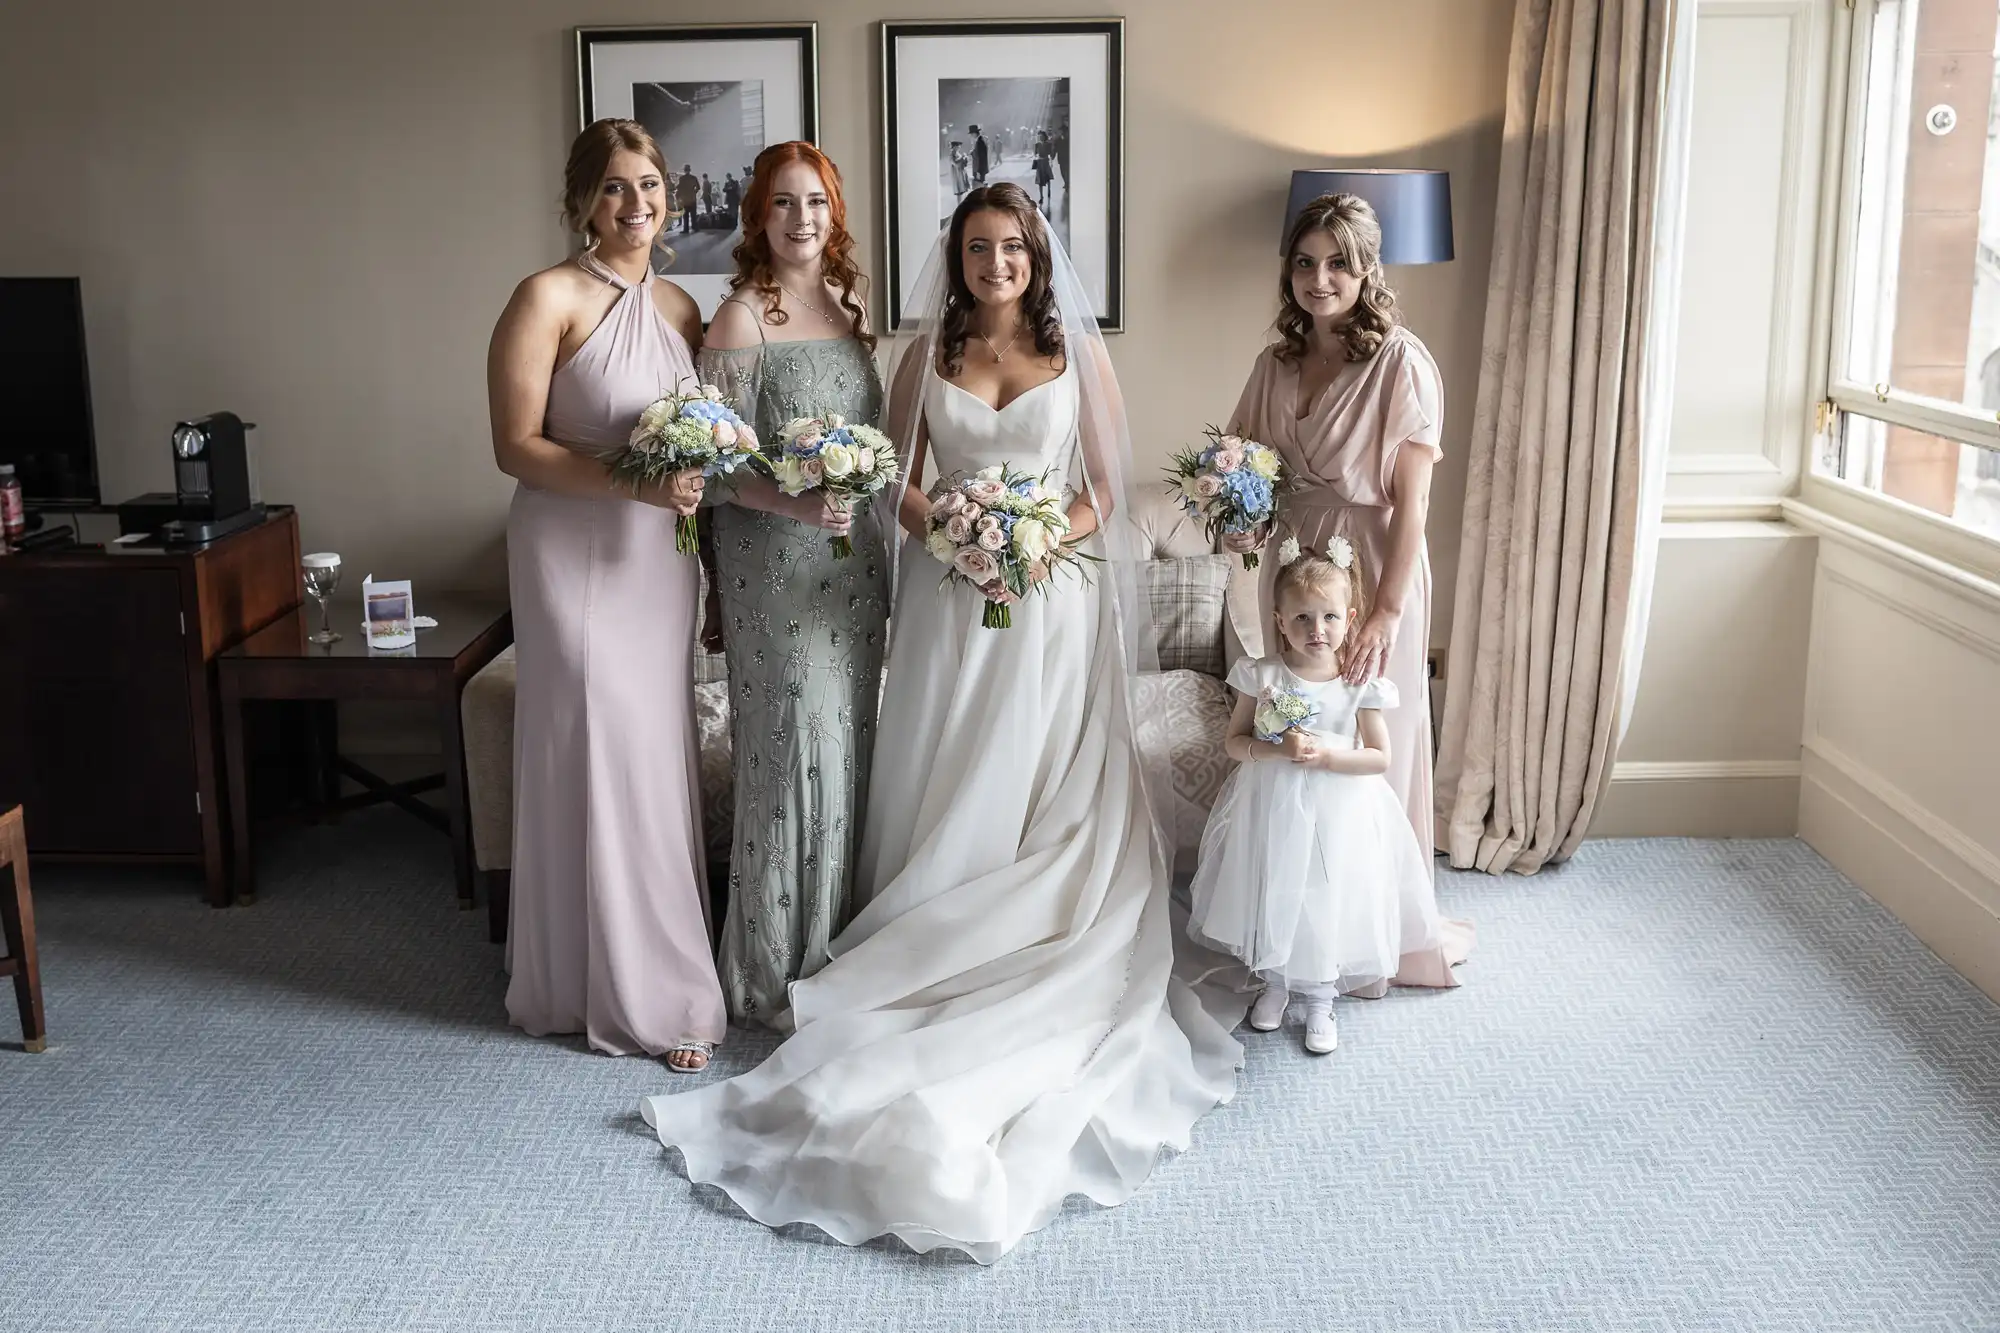 Bride in a white gown with three bridesmaids and a young flower girl, all holding bouquets, posing in a hotel room.